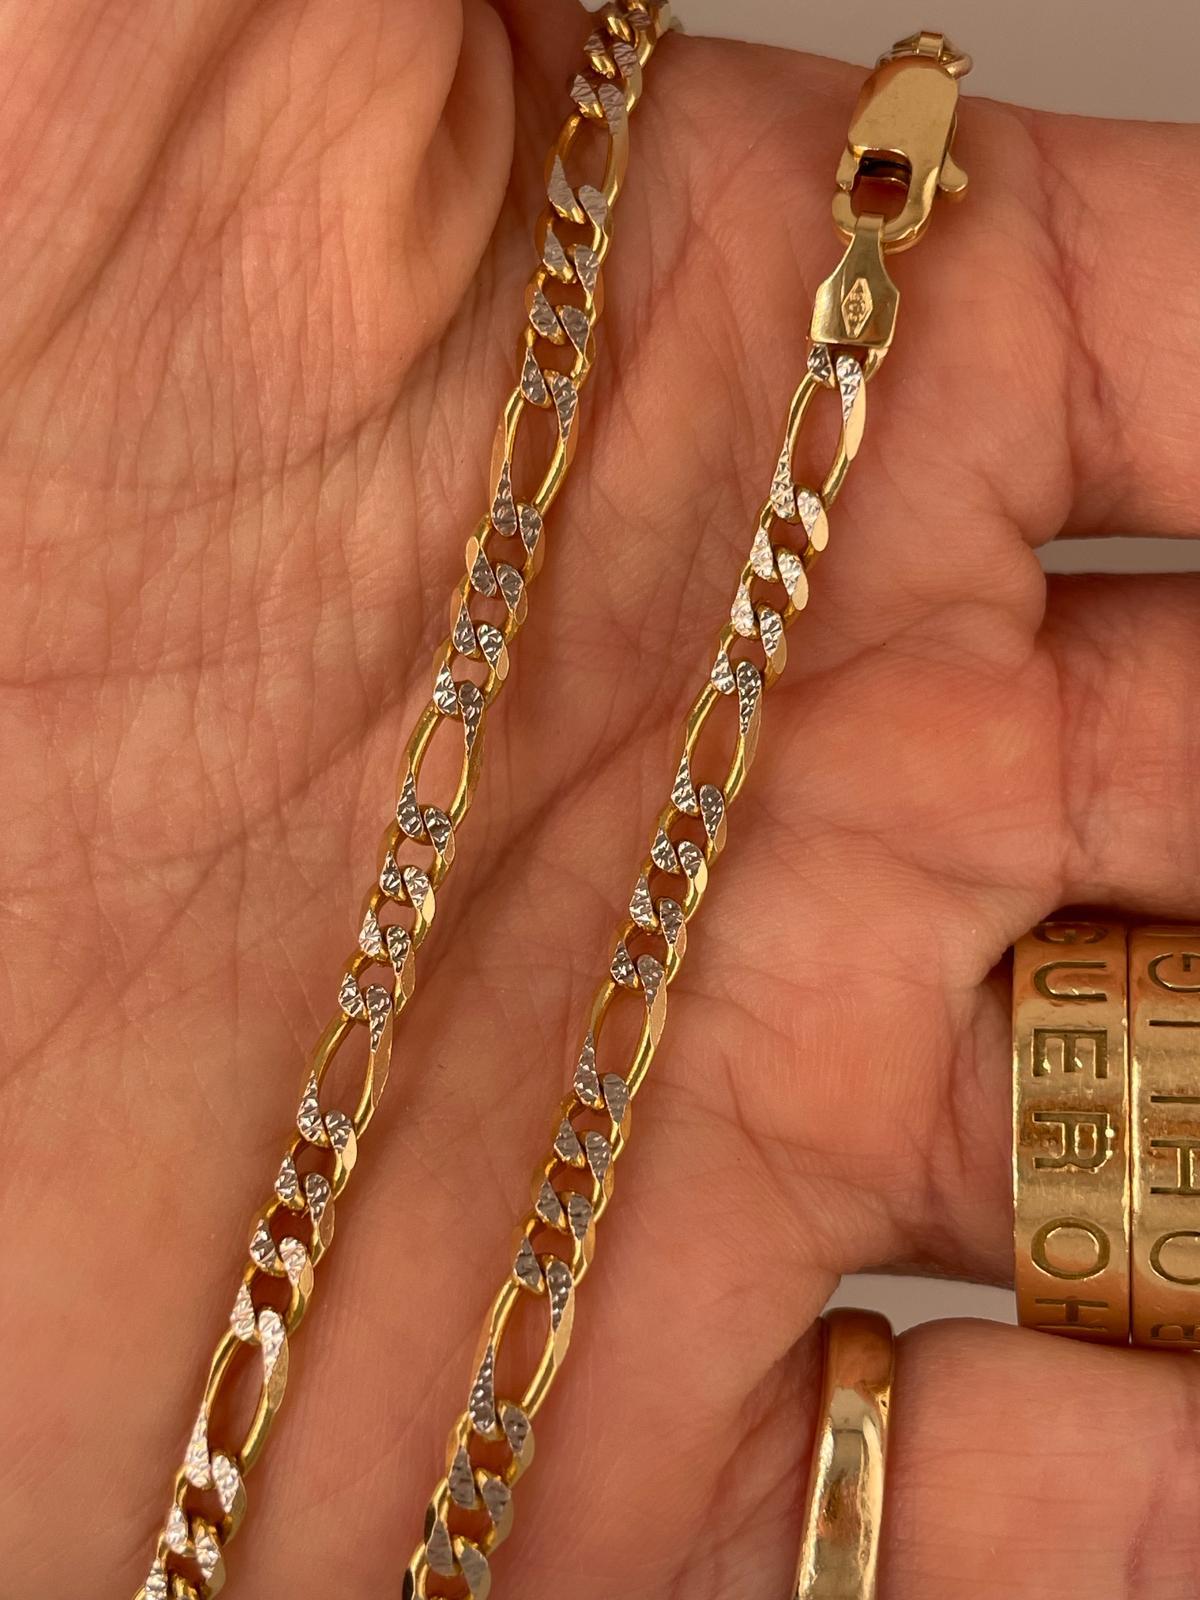 18k yellow gold curb link style chain with white gold detail  7